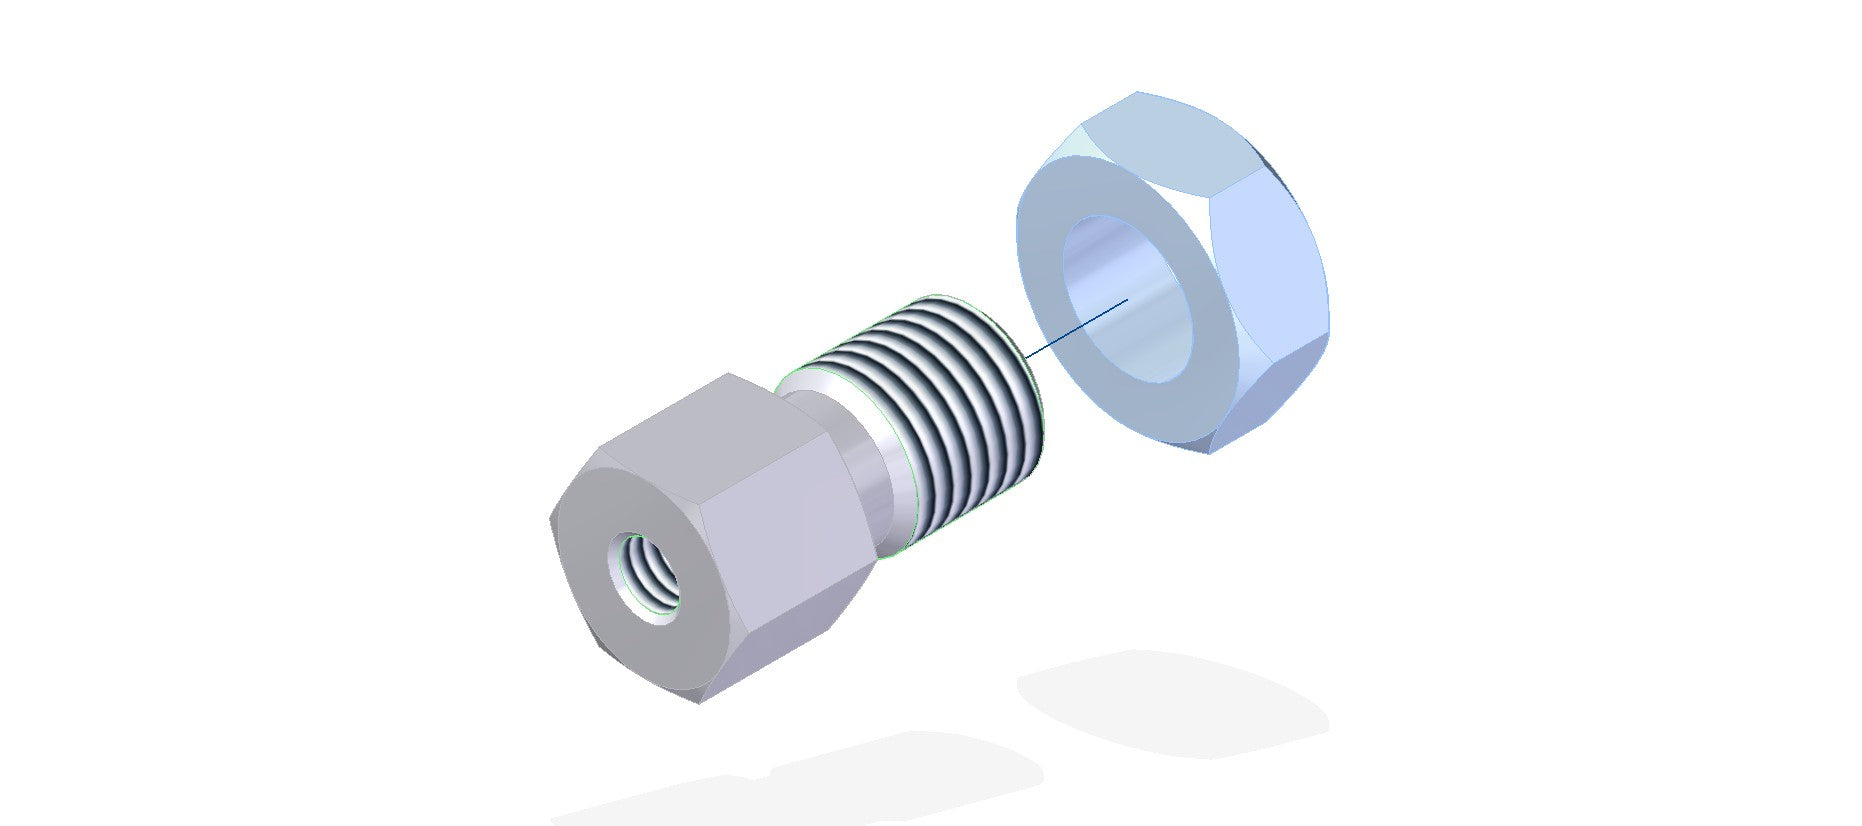 A nut and bolt with a nut